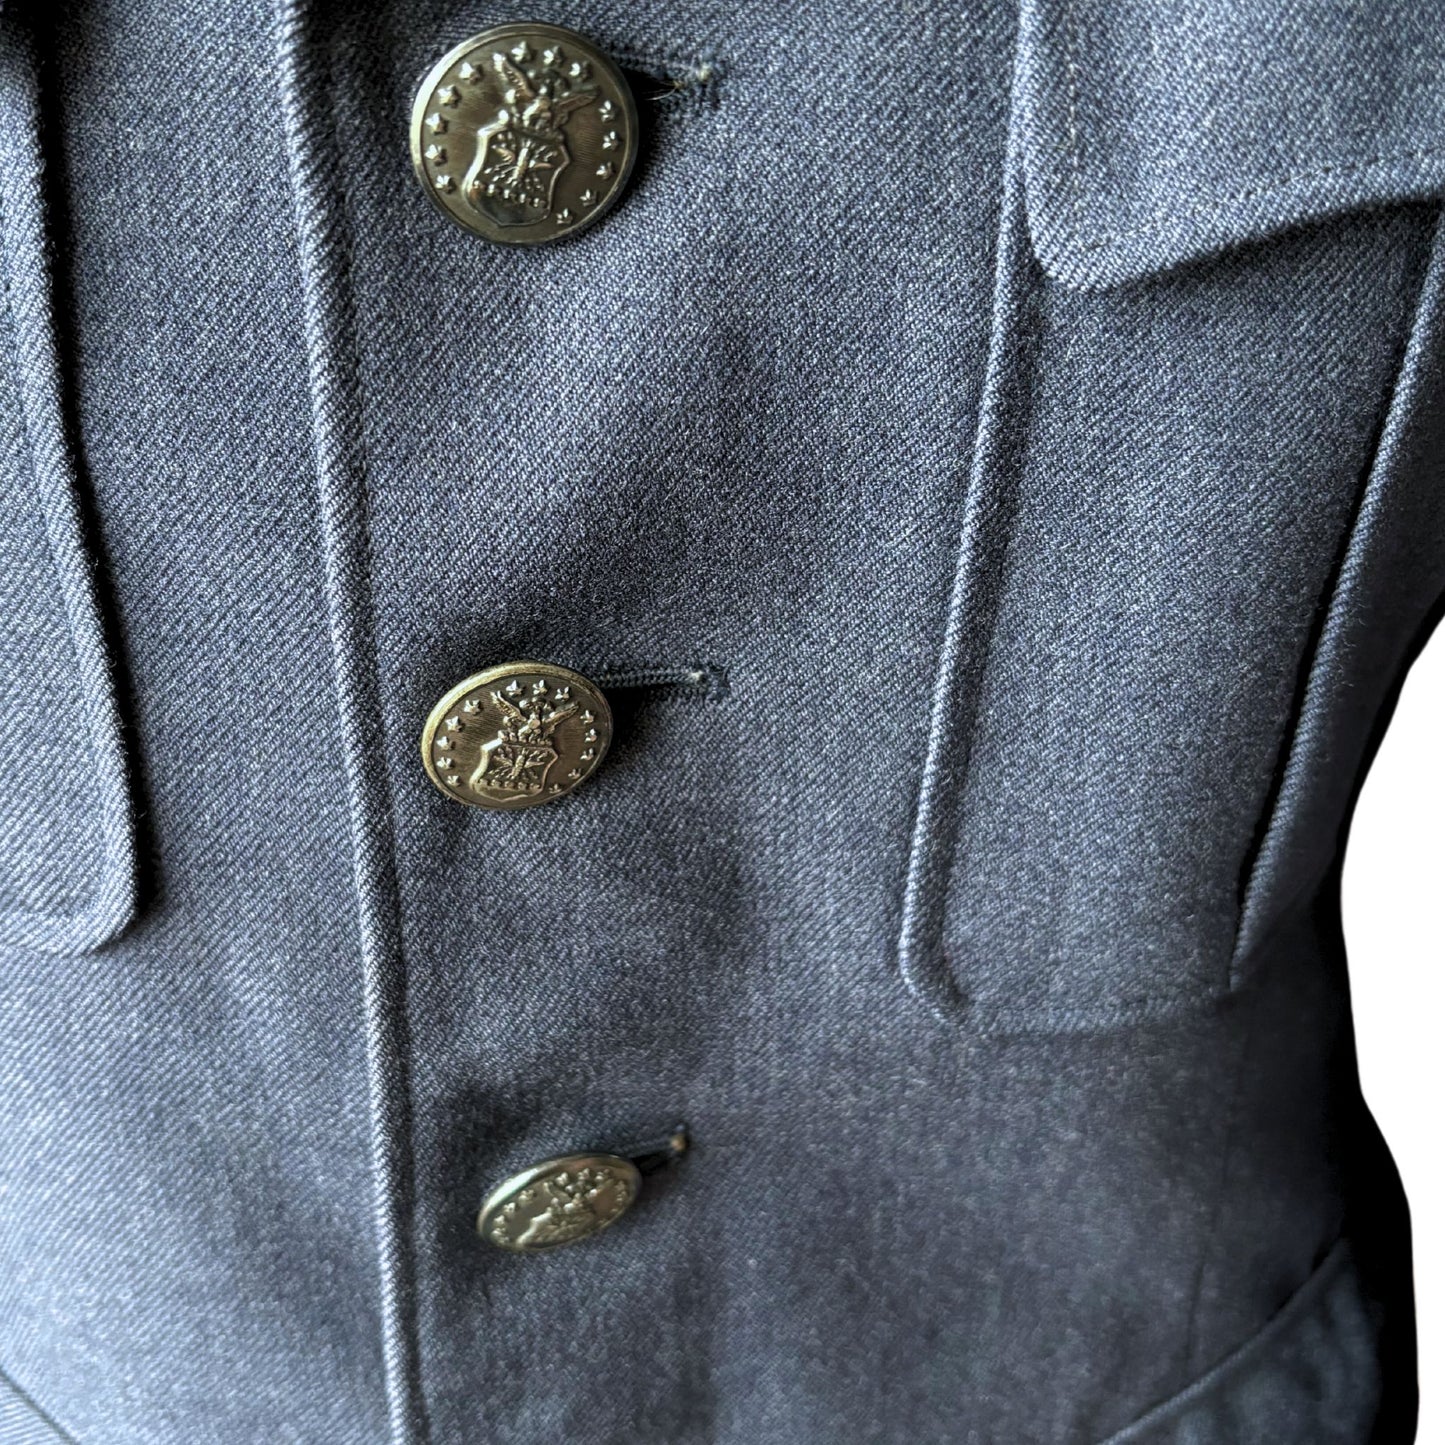 1950s USAF Blue Wool Serge Vintage Military Jacket with Detachable Metal US Pins. Approx UK XS-S (m) 10-12(f)